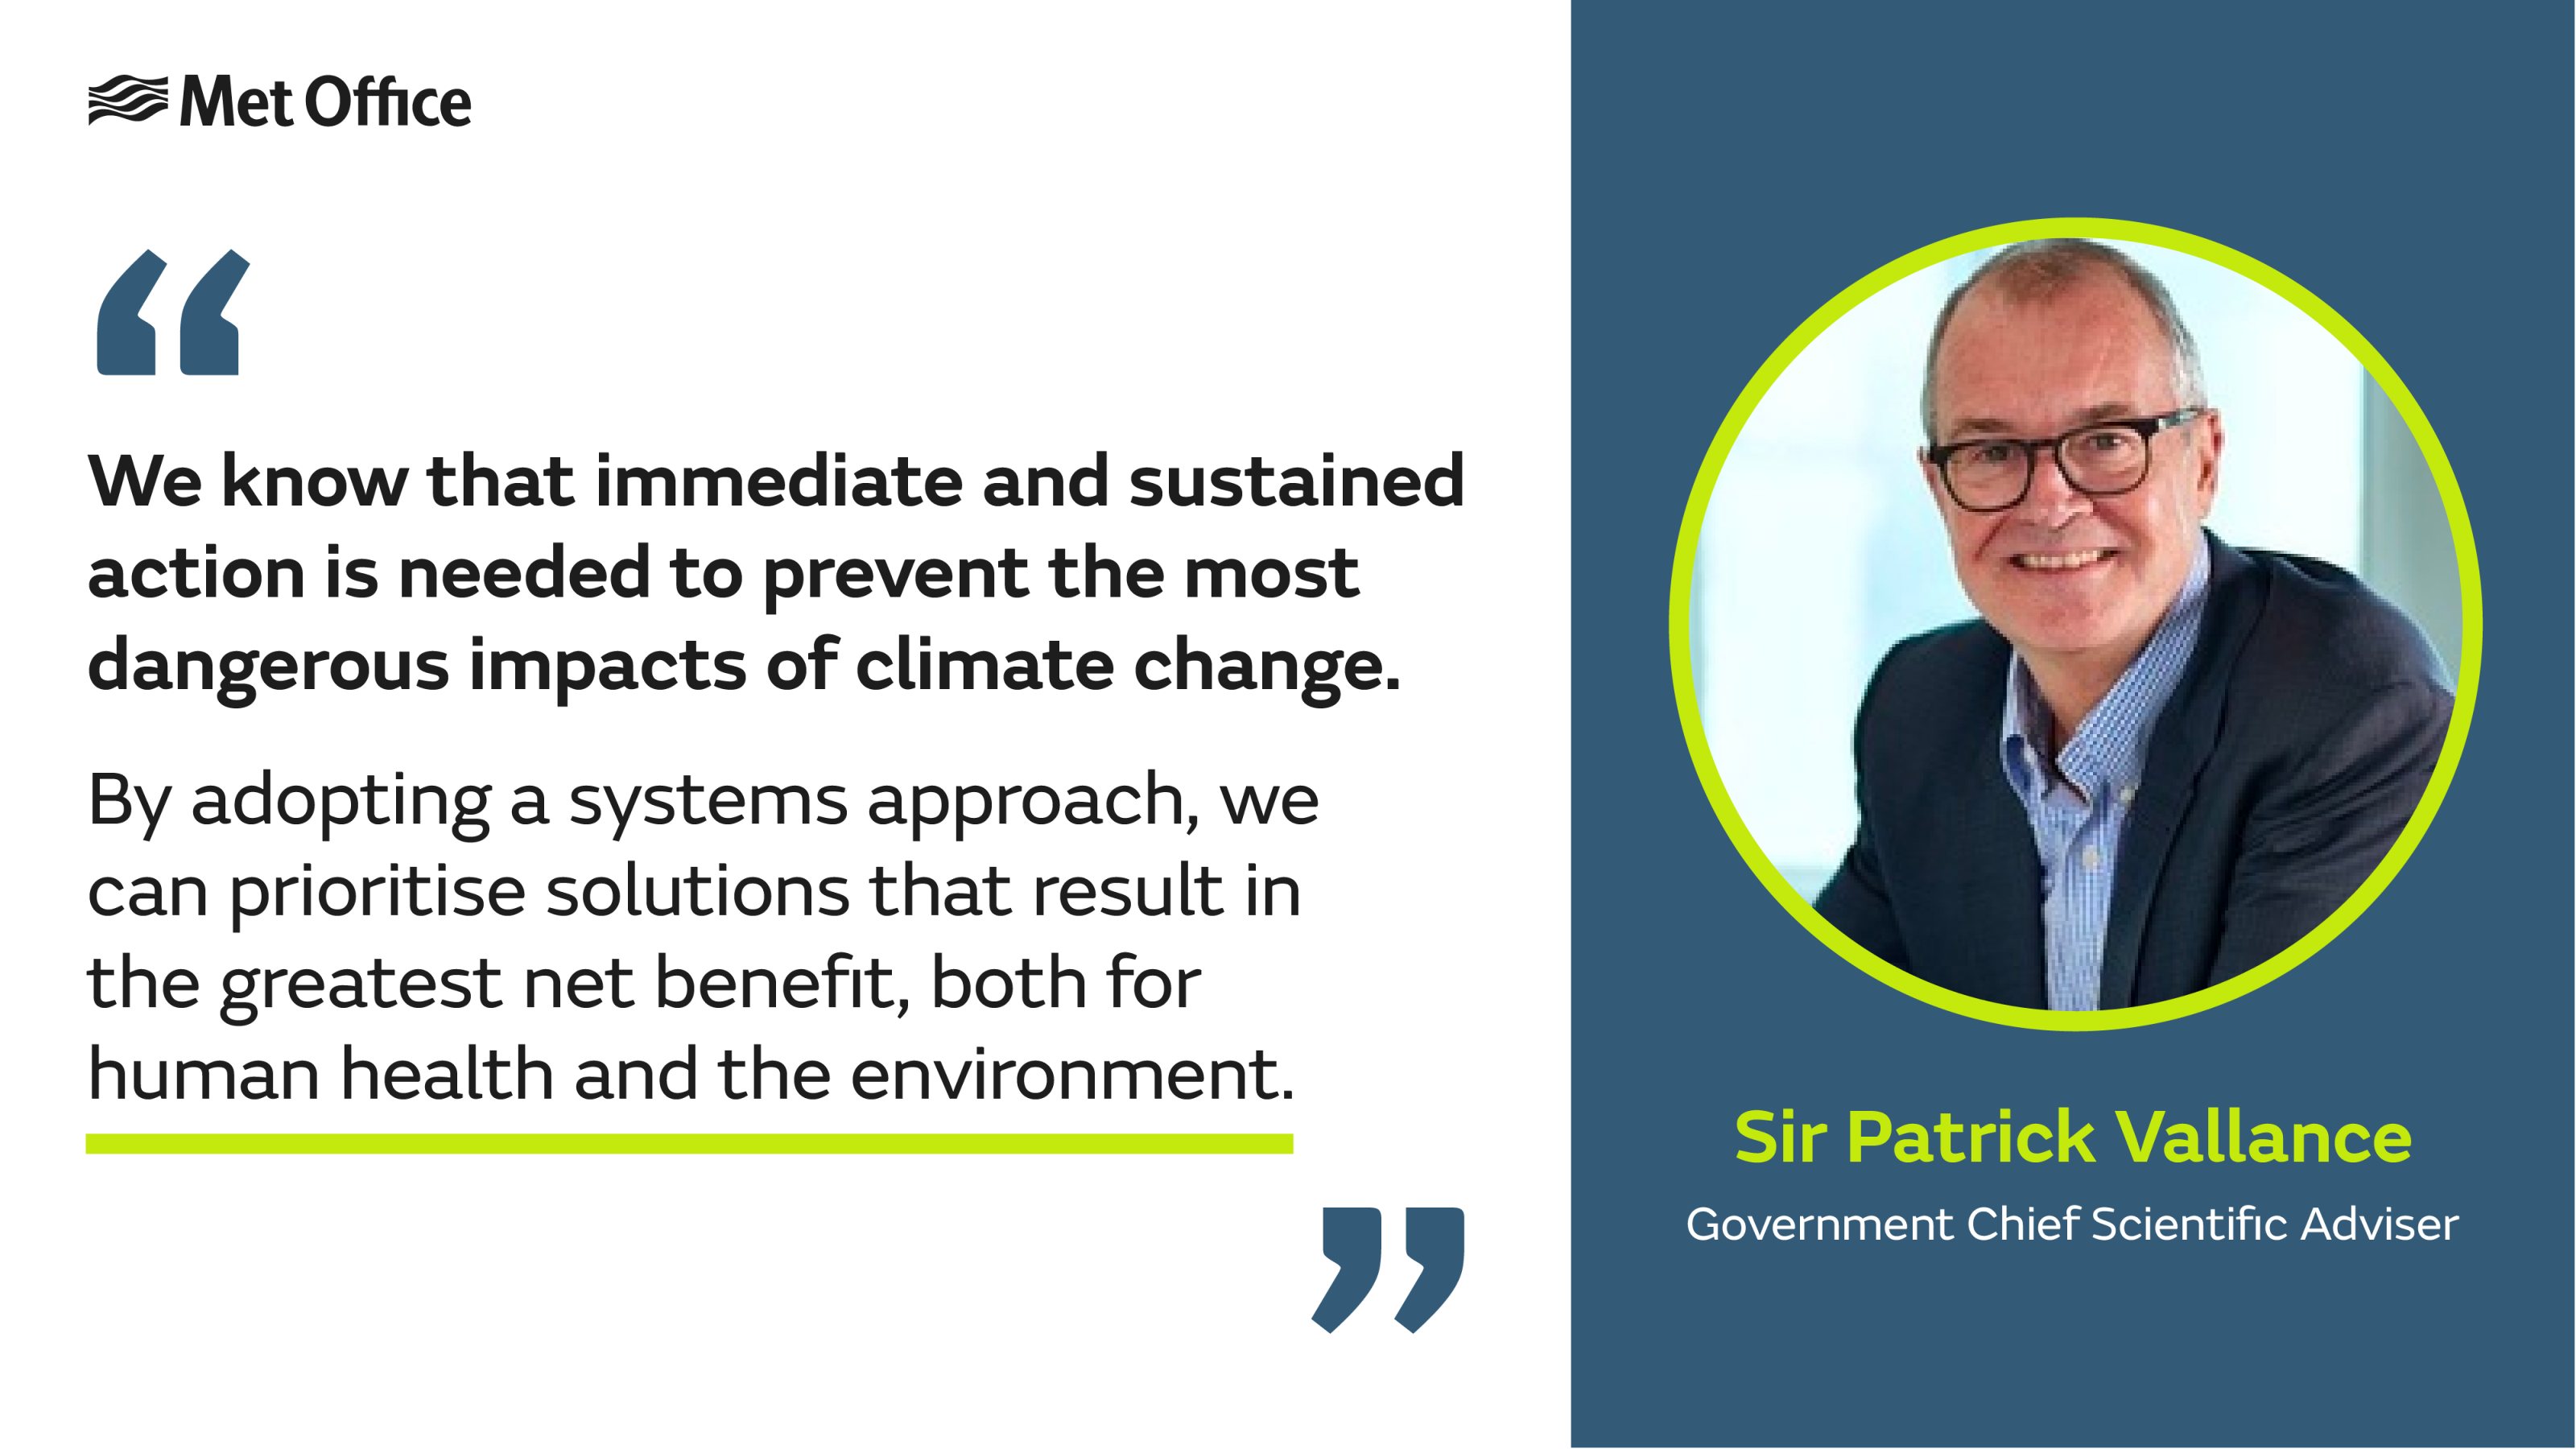 Quote and image of Sir Patrick Vallance, Government Chief Scientific Adviser